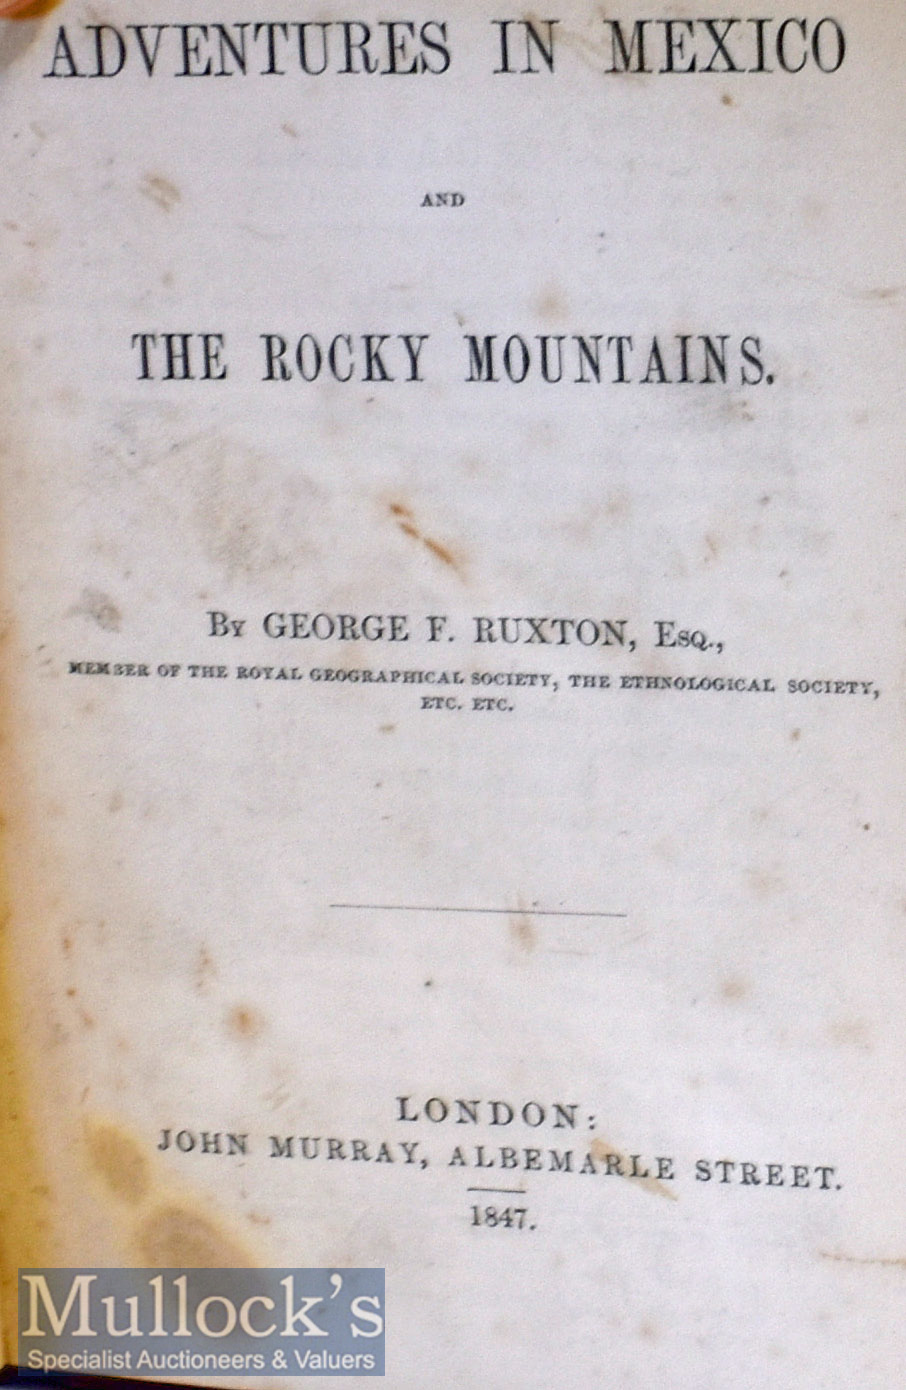 USA – Mexico – Adventures in Mexico and The Rockey Mountains by George F Ruxton, by J Murray 1847 - Image 2 of 2